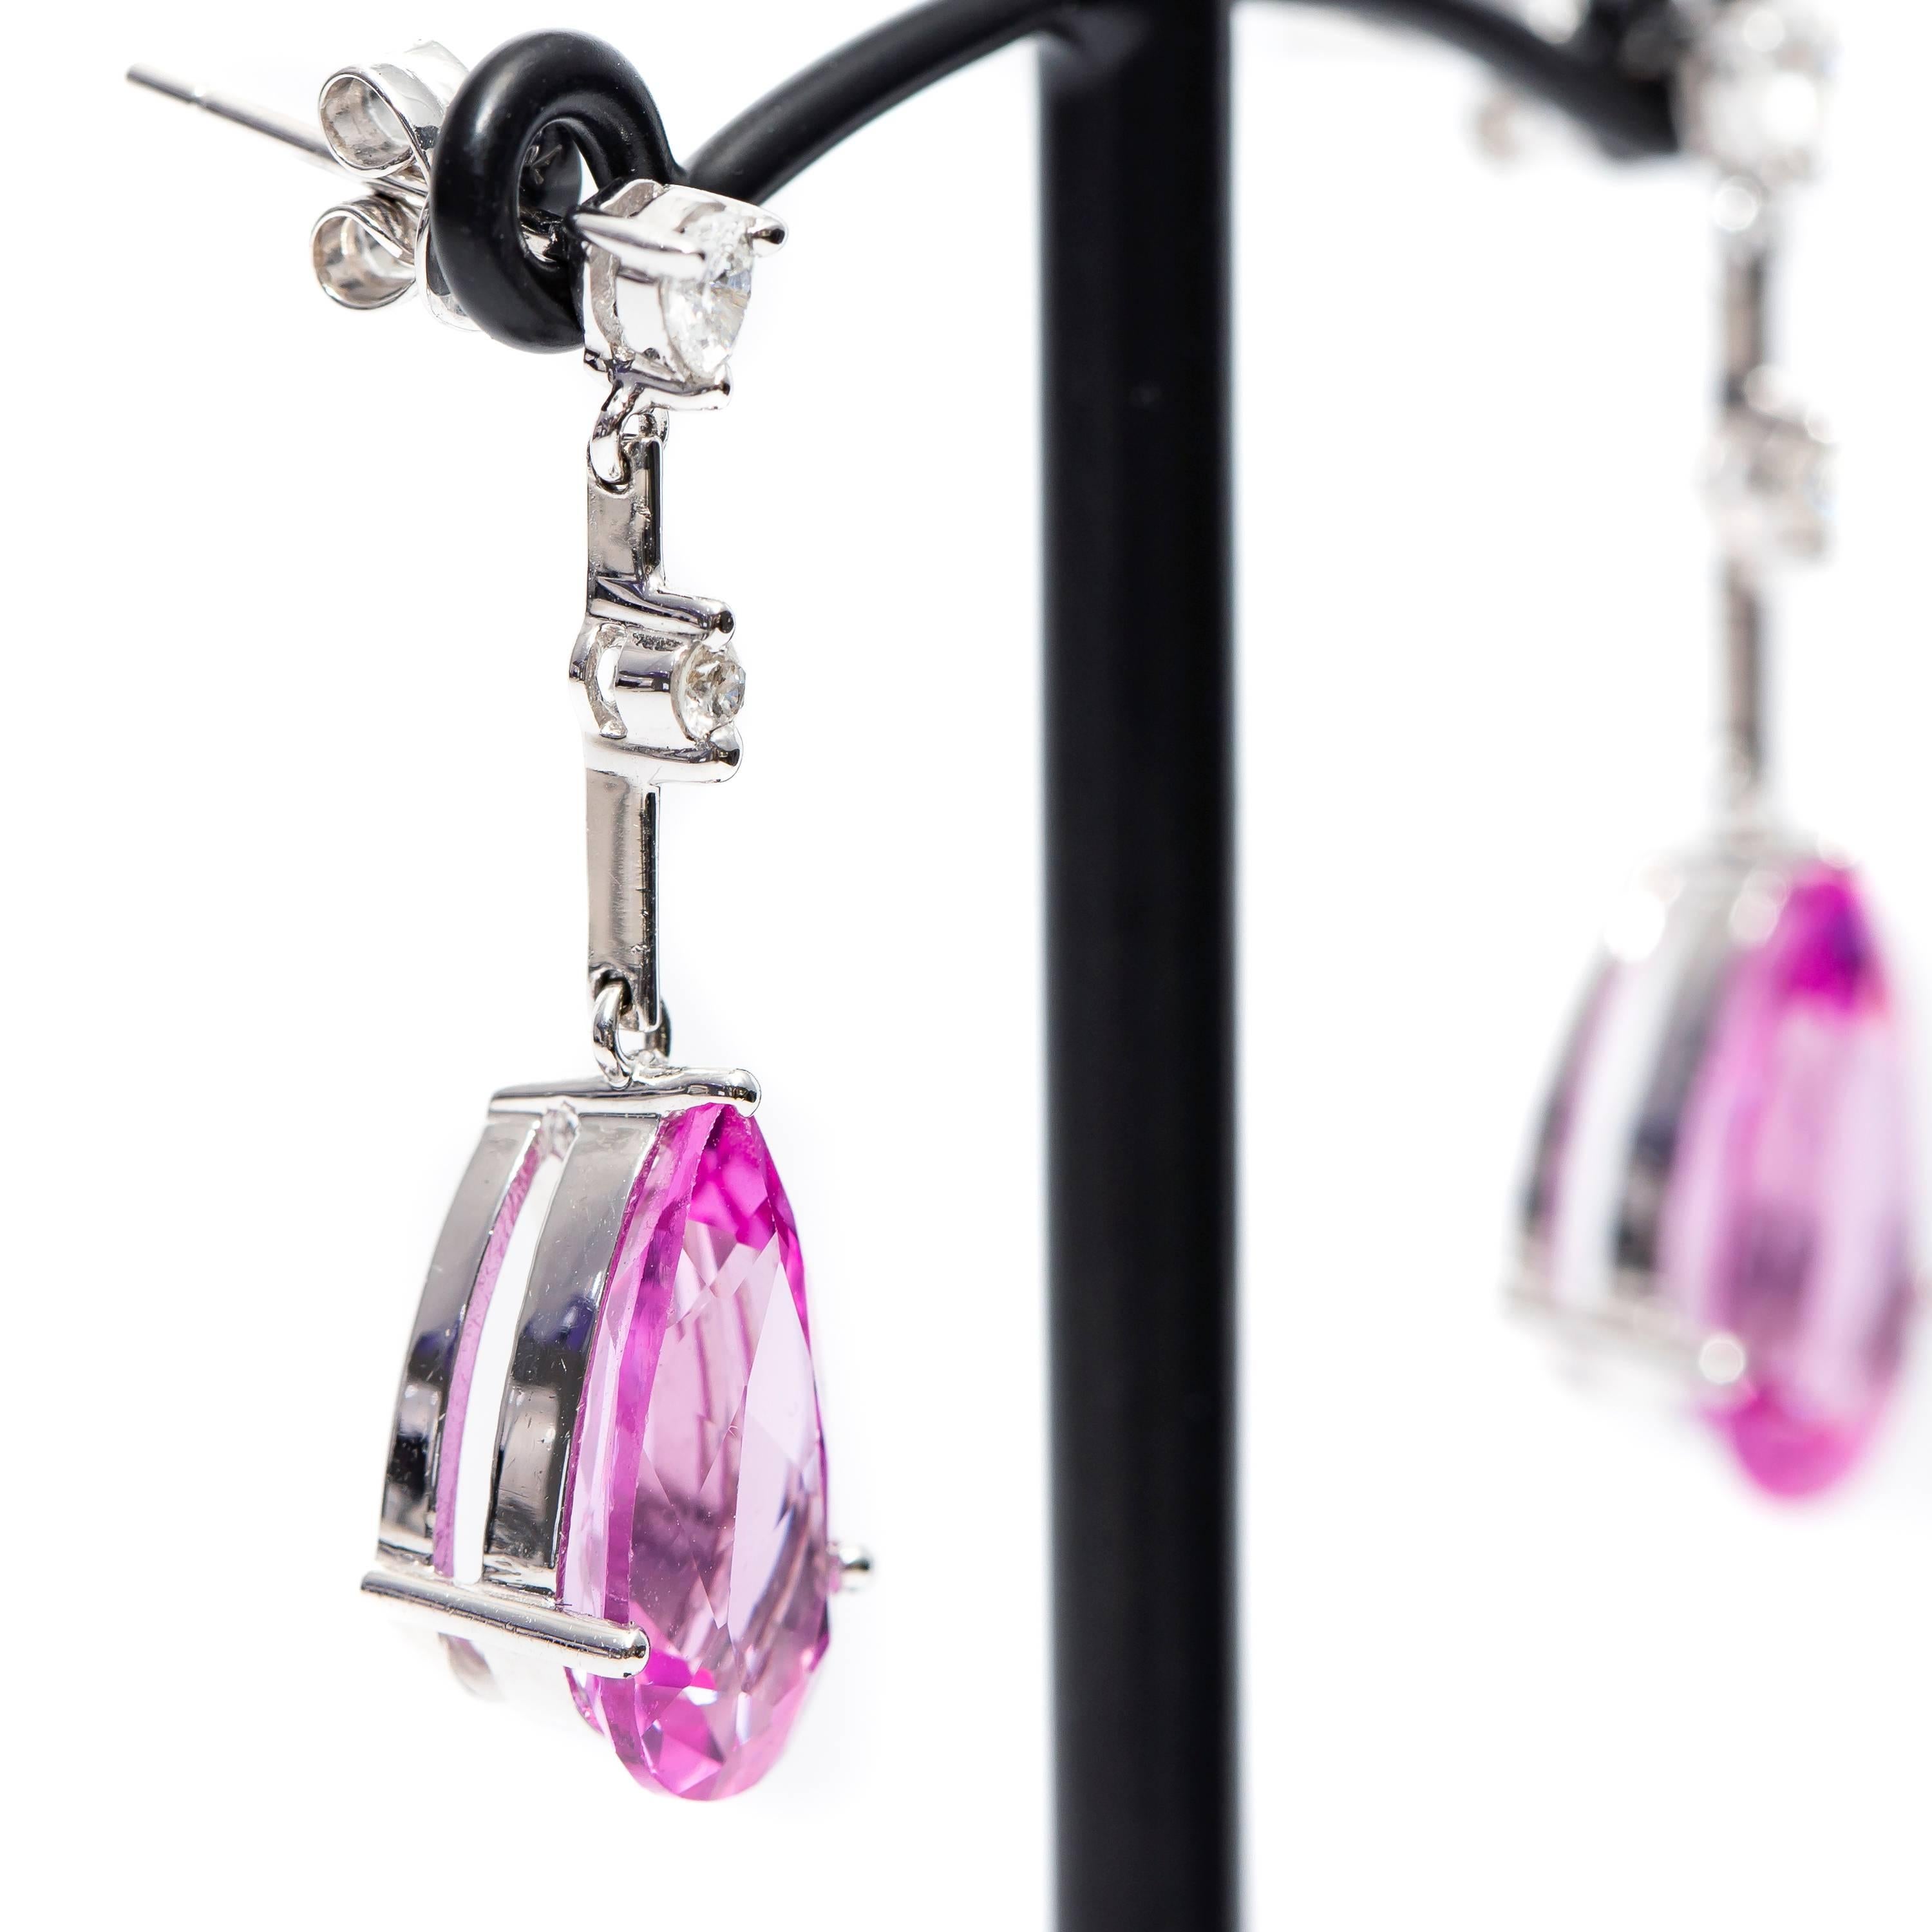 Beautiful Pink Synthetic Corundum,  looks like vibrant pink sapphire 15 mm x 8 mm Drop Earrings featuring 0.28 Carat Pear and Round Diamonds Color H Clarity SI1. Perfect for any occasion set in 18 Karat White Gold, British Hallmarked.
This design